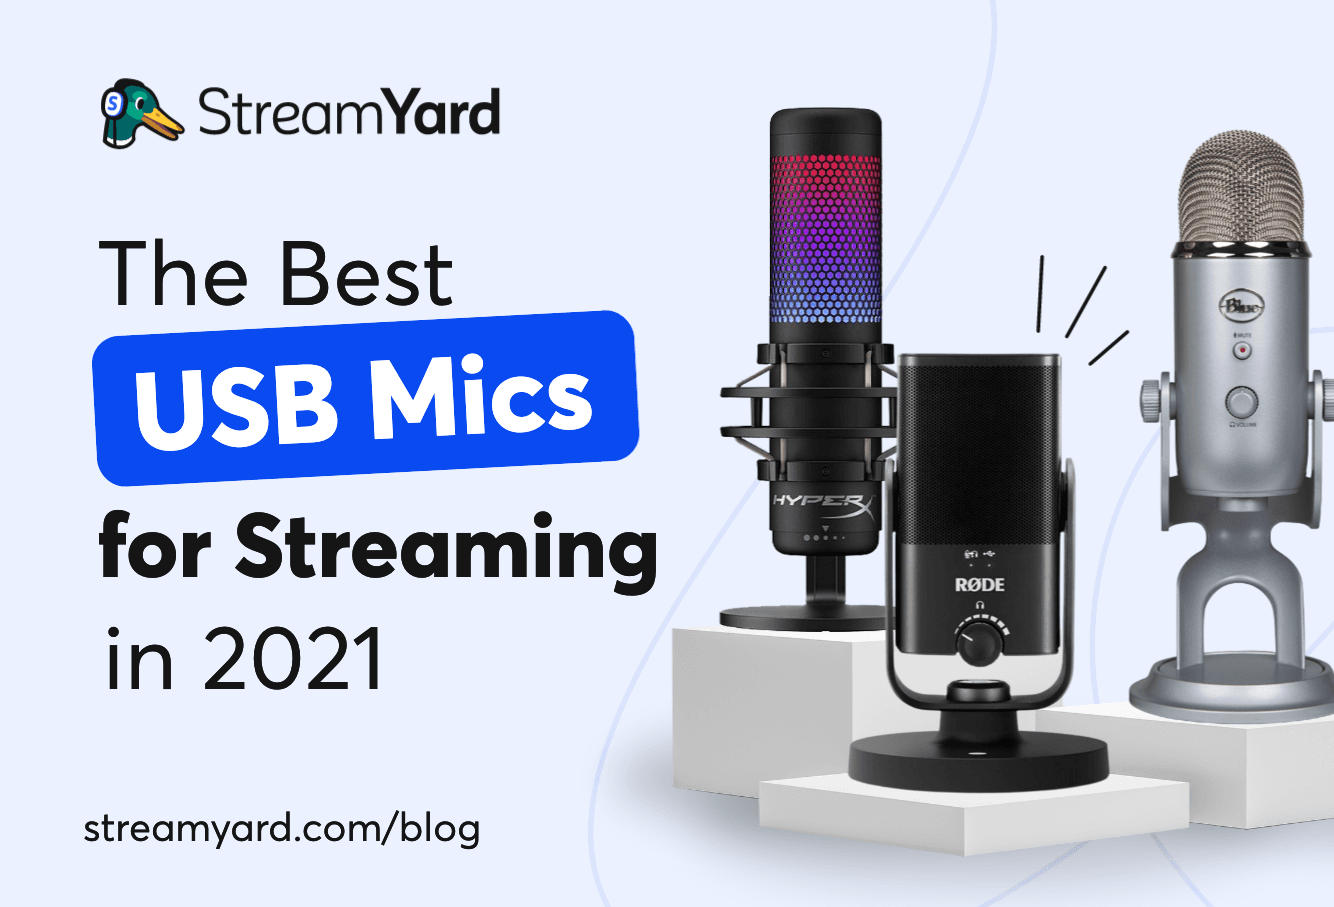 Looking for the best USB microphone? Here's a list of the 17 best USB mics for live streaming in 2021 to use on your next live stream or podcast.